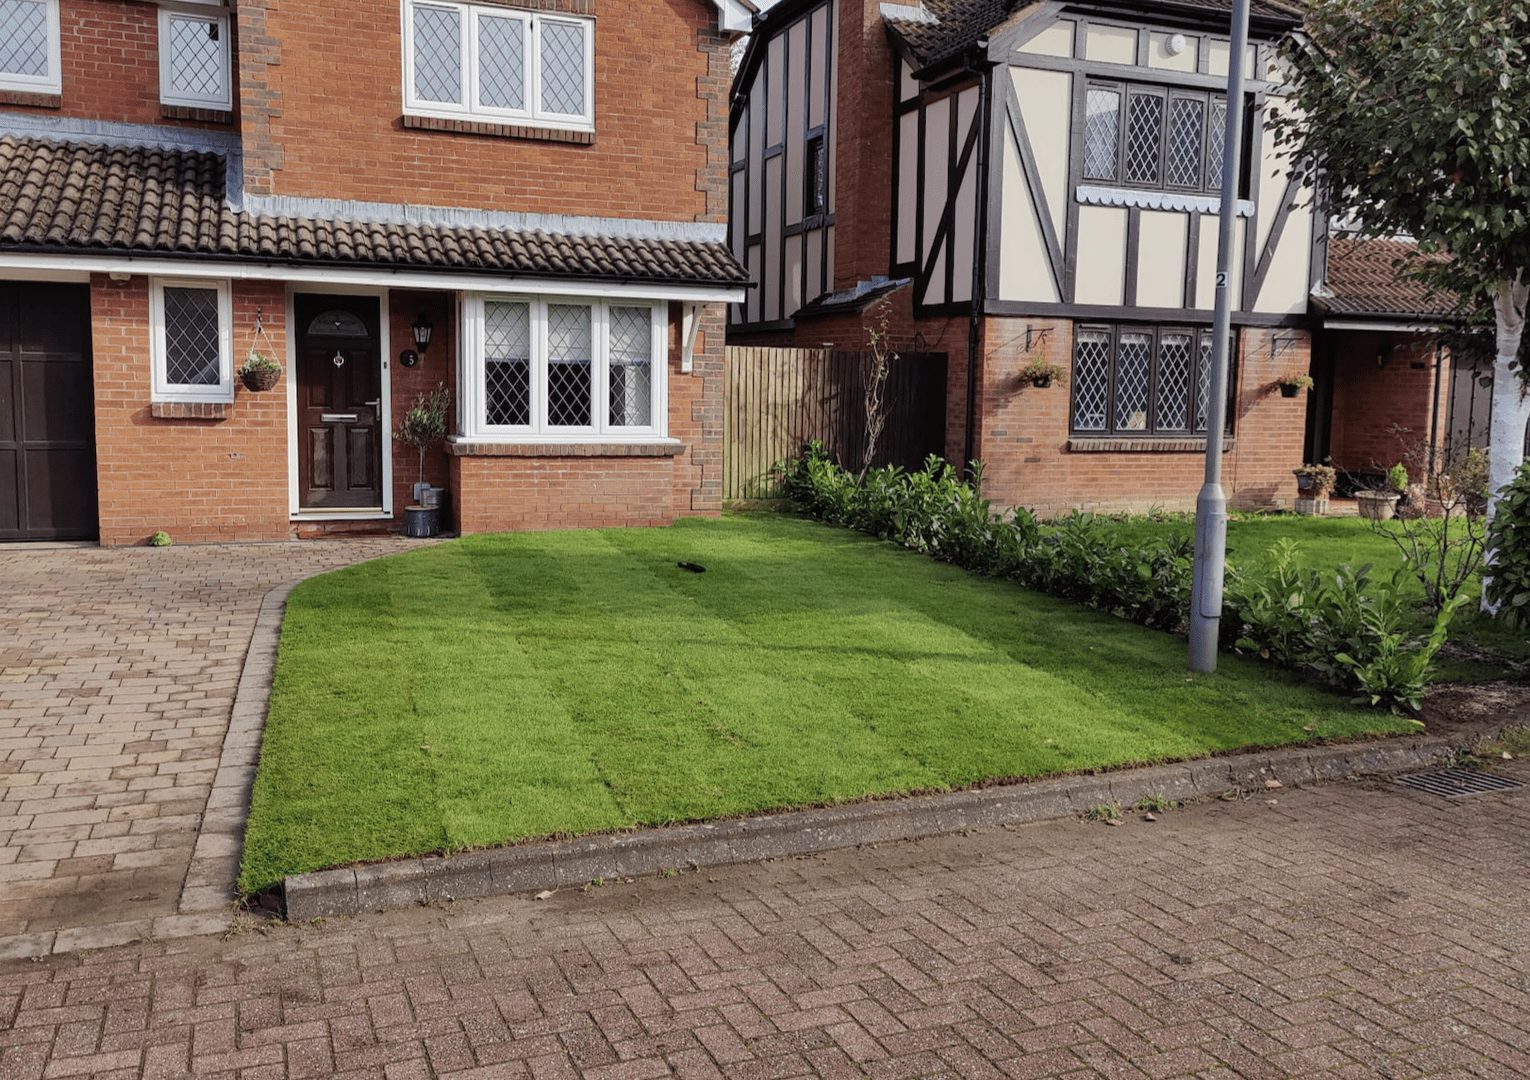 Turfing and hedging